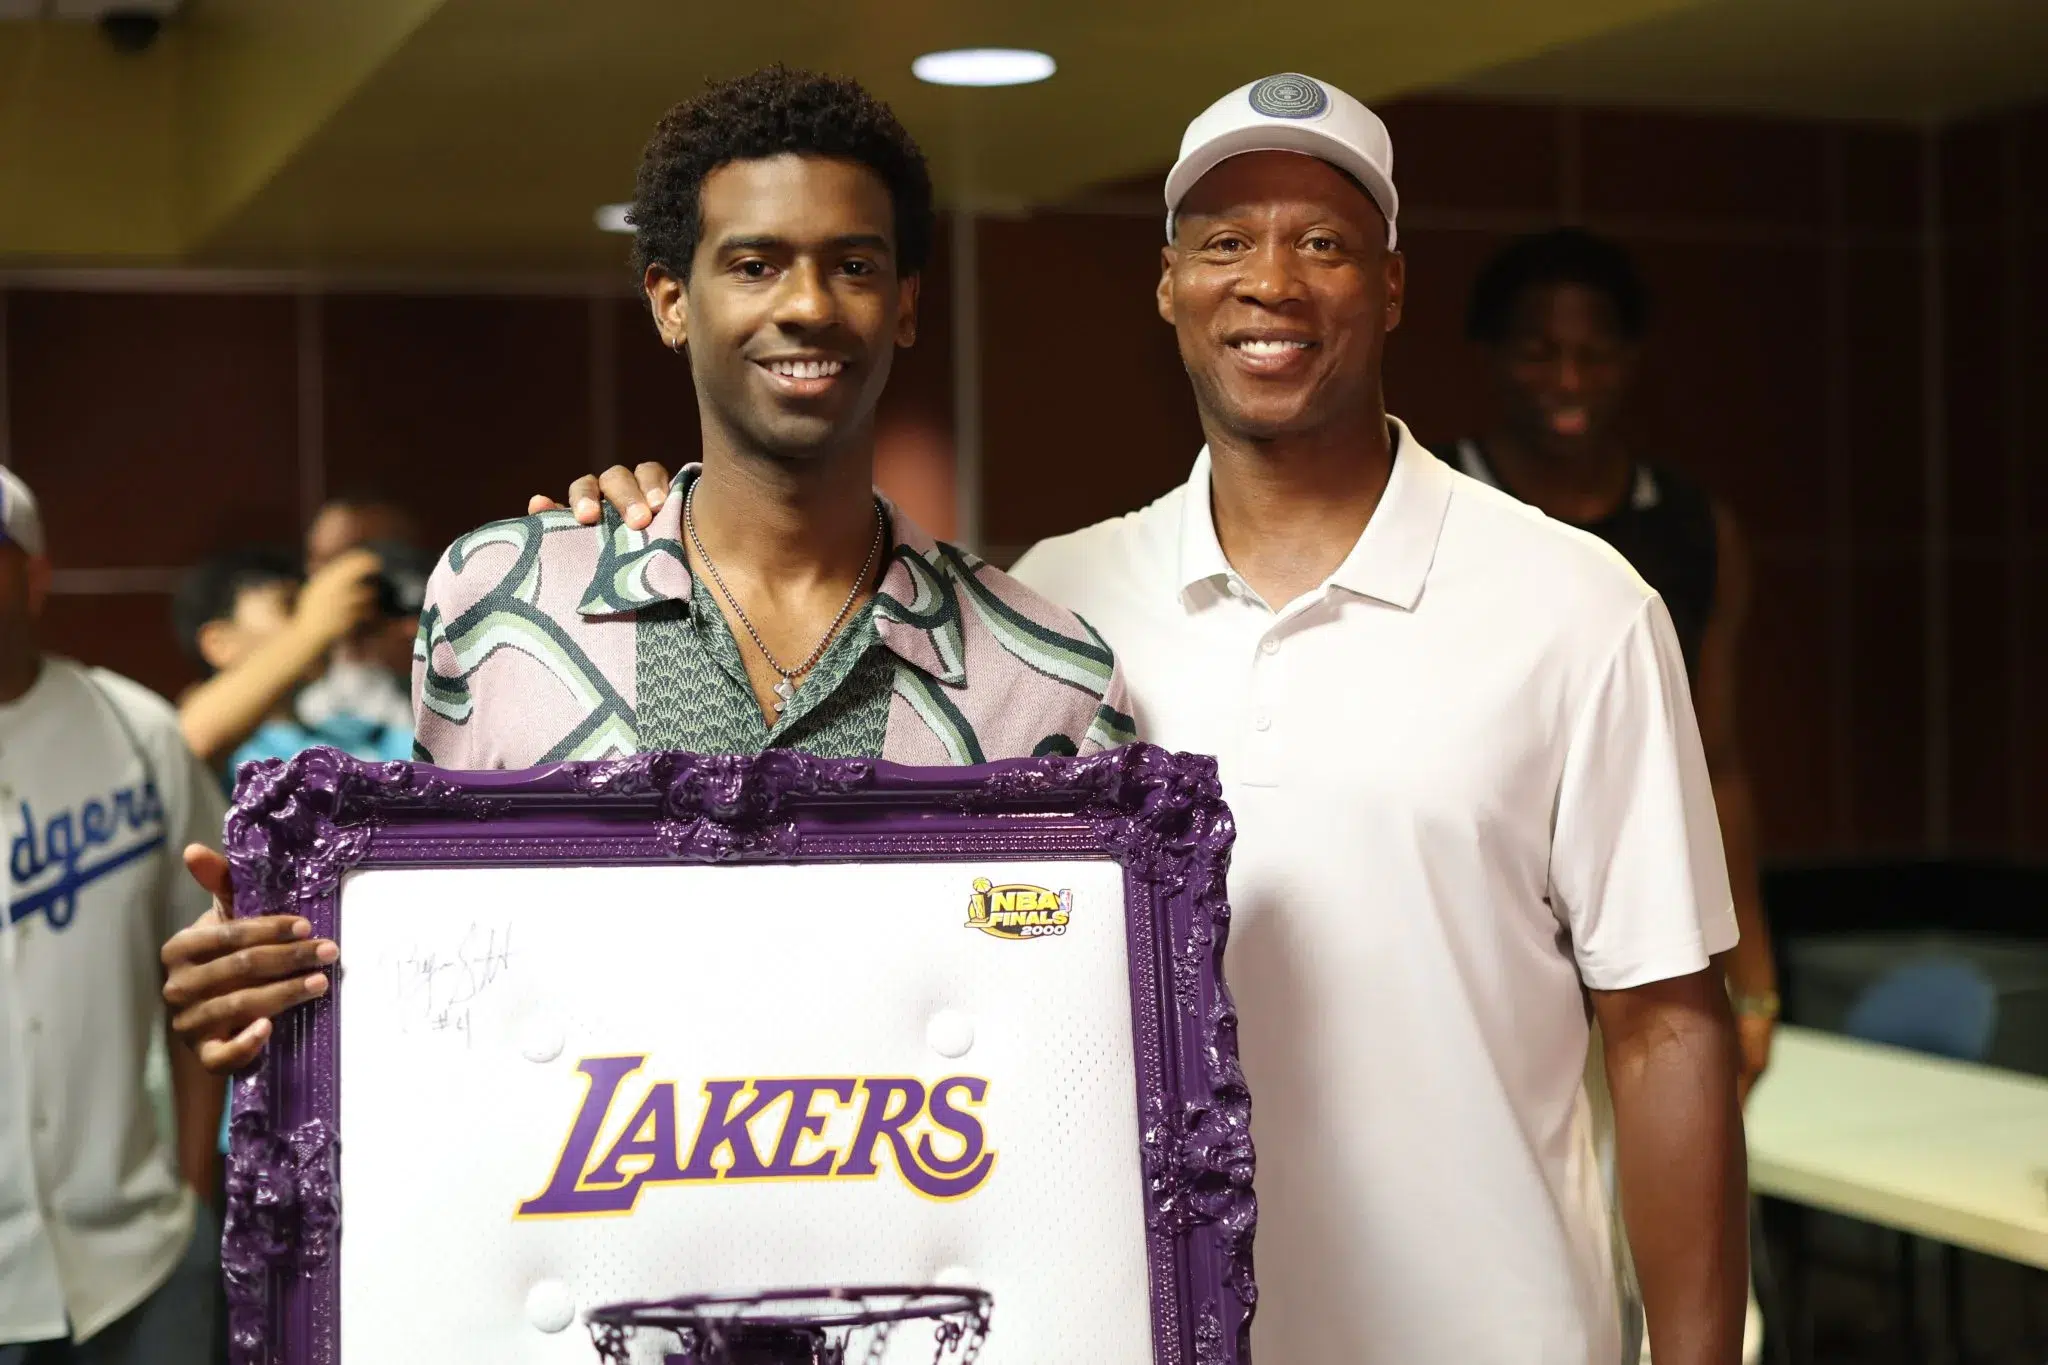 Two men standing next to a framed picture of a lakers player.